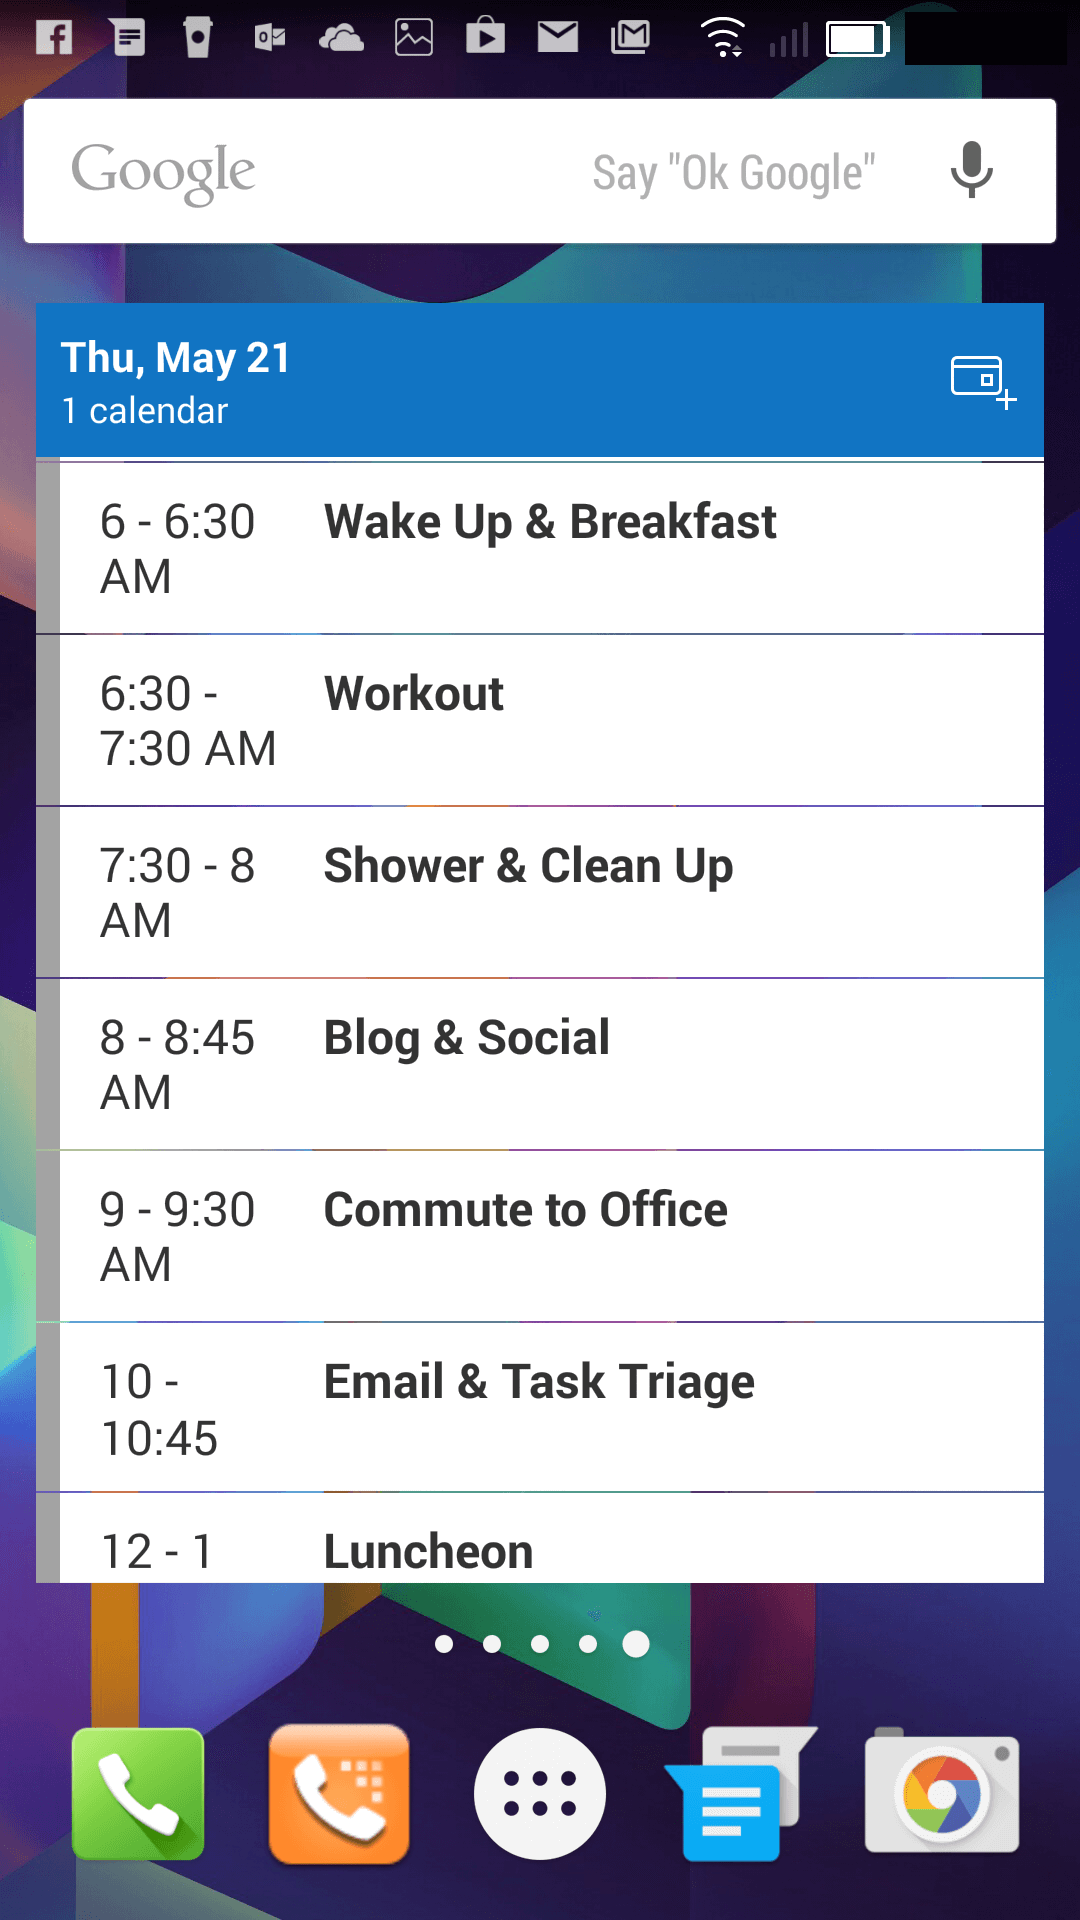 Microsoft Update Outlook for Android with Improved Agenda Widget – ClintonFitch.com1080 x 1920